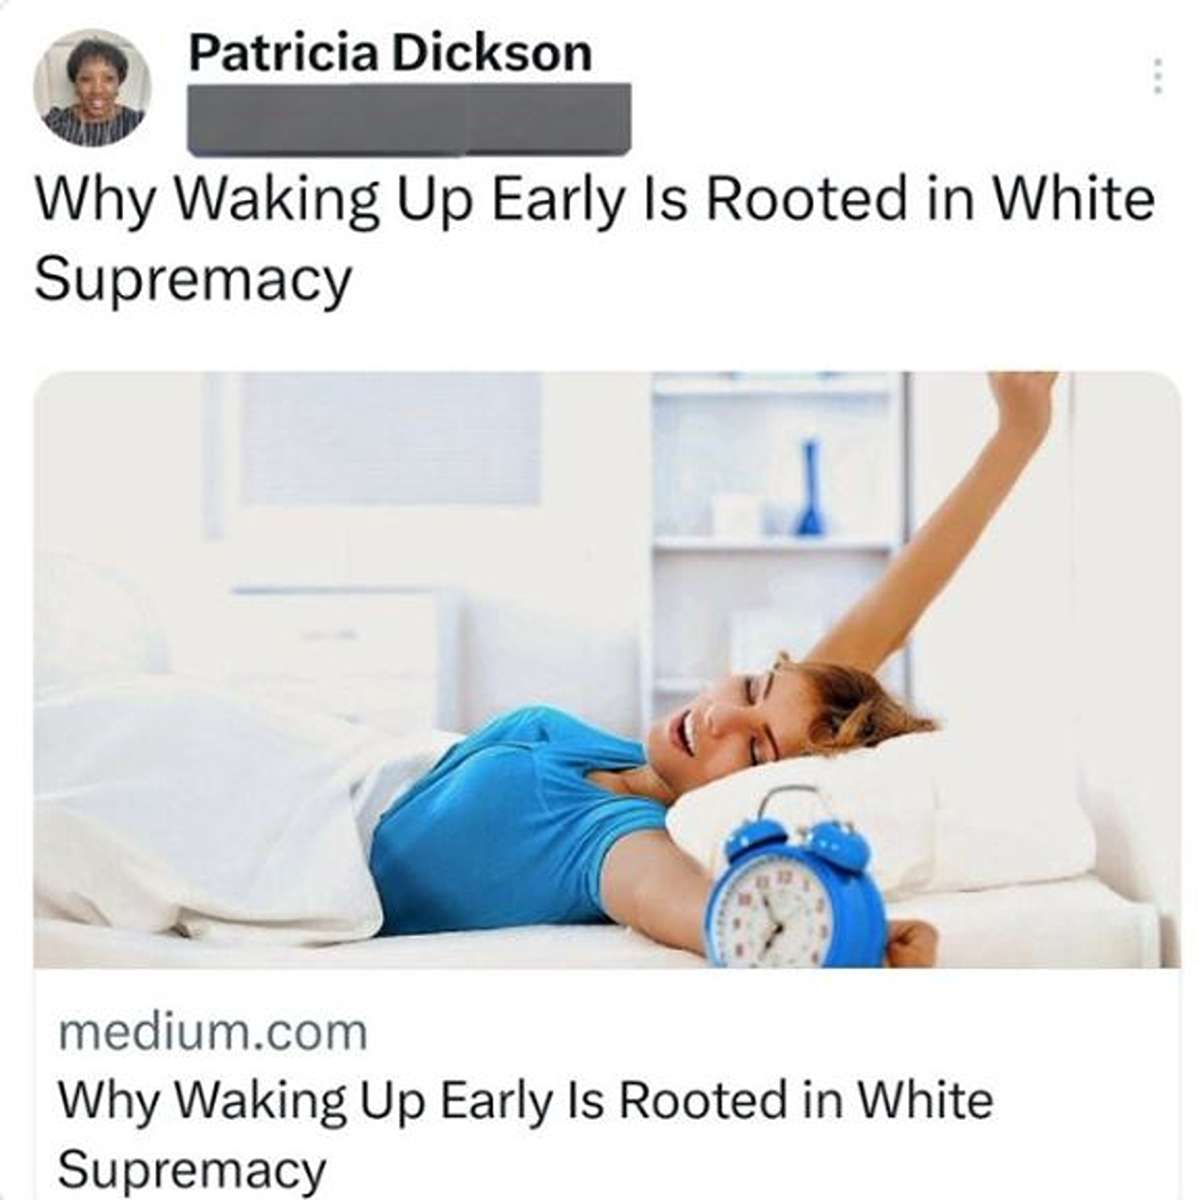 delusional people - anthony bernardi medium - Patricia Dickson Why Waking Up Early Is Rooted in White Supremacy medium.com Why Waking Up Early Is Rooted in White Supremacy